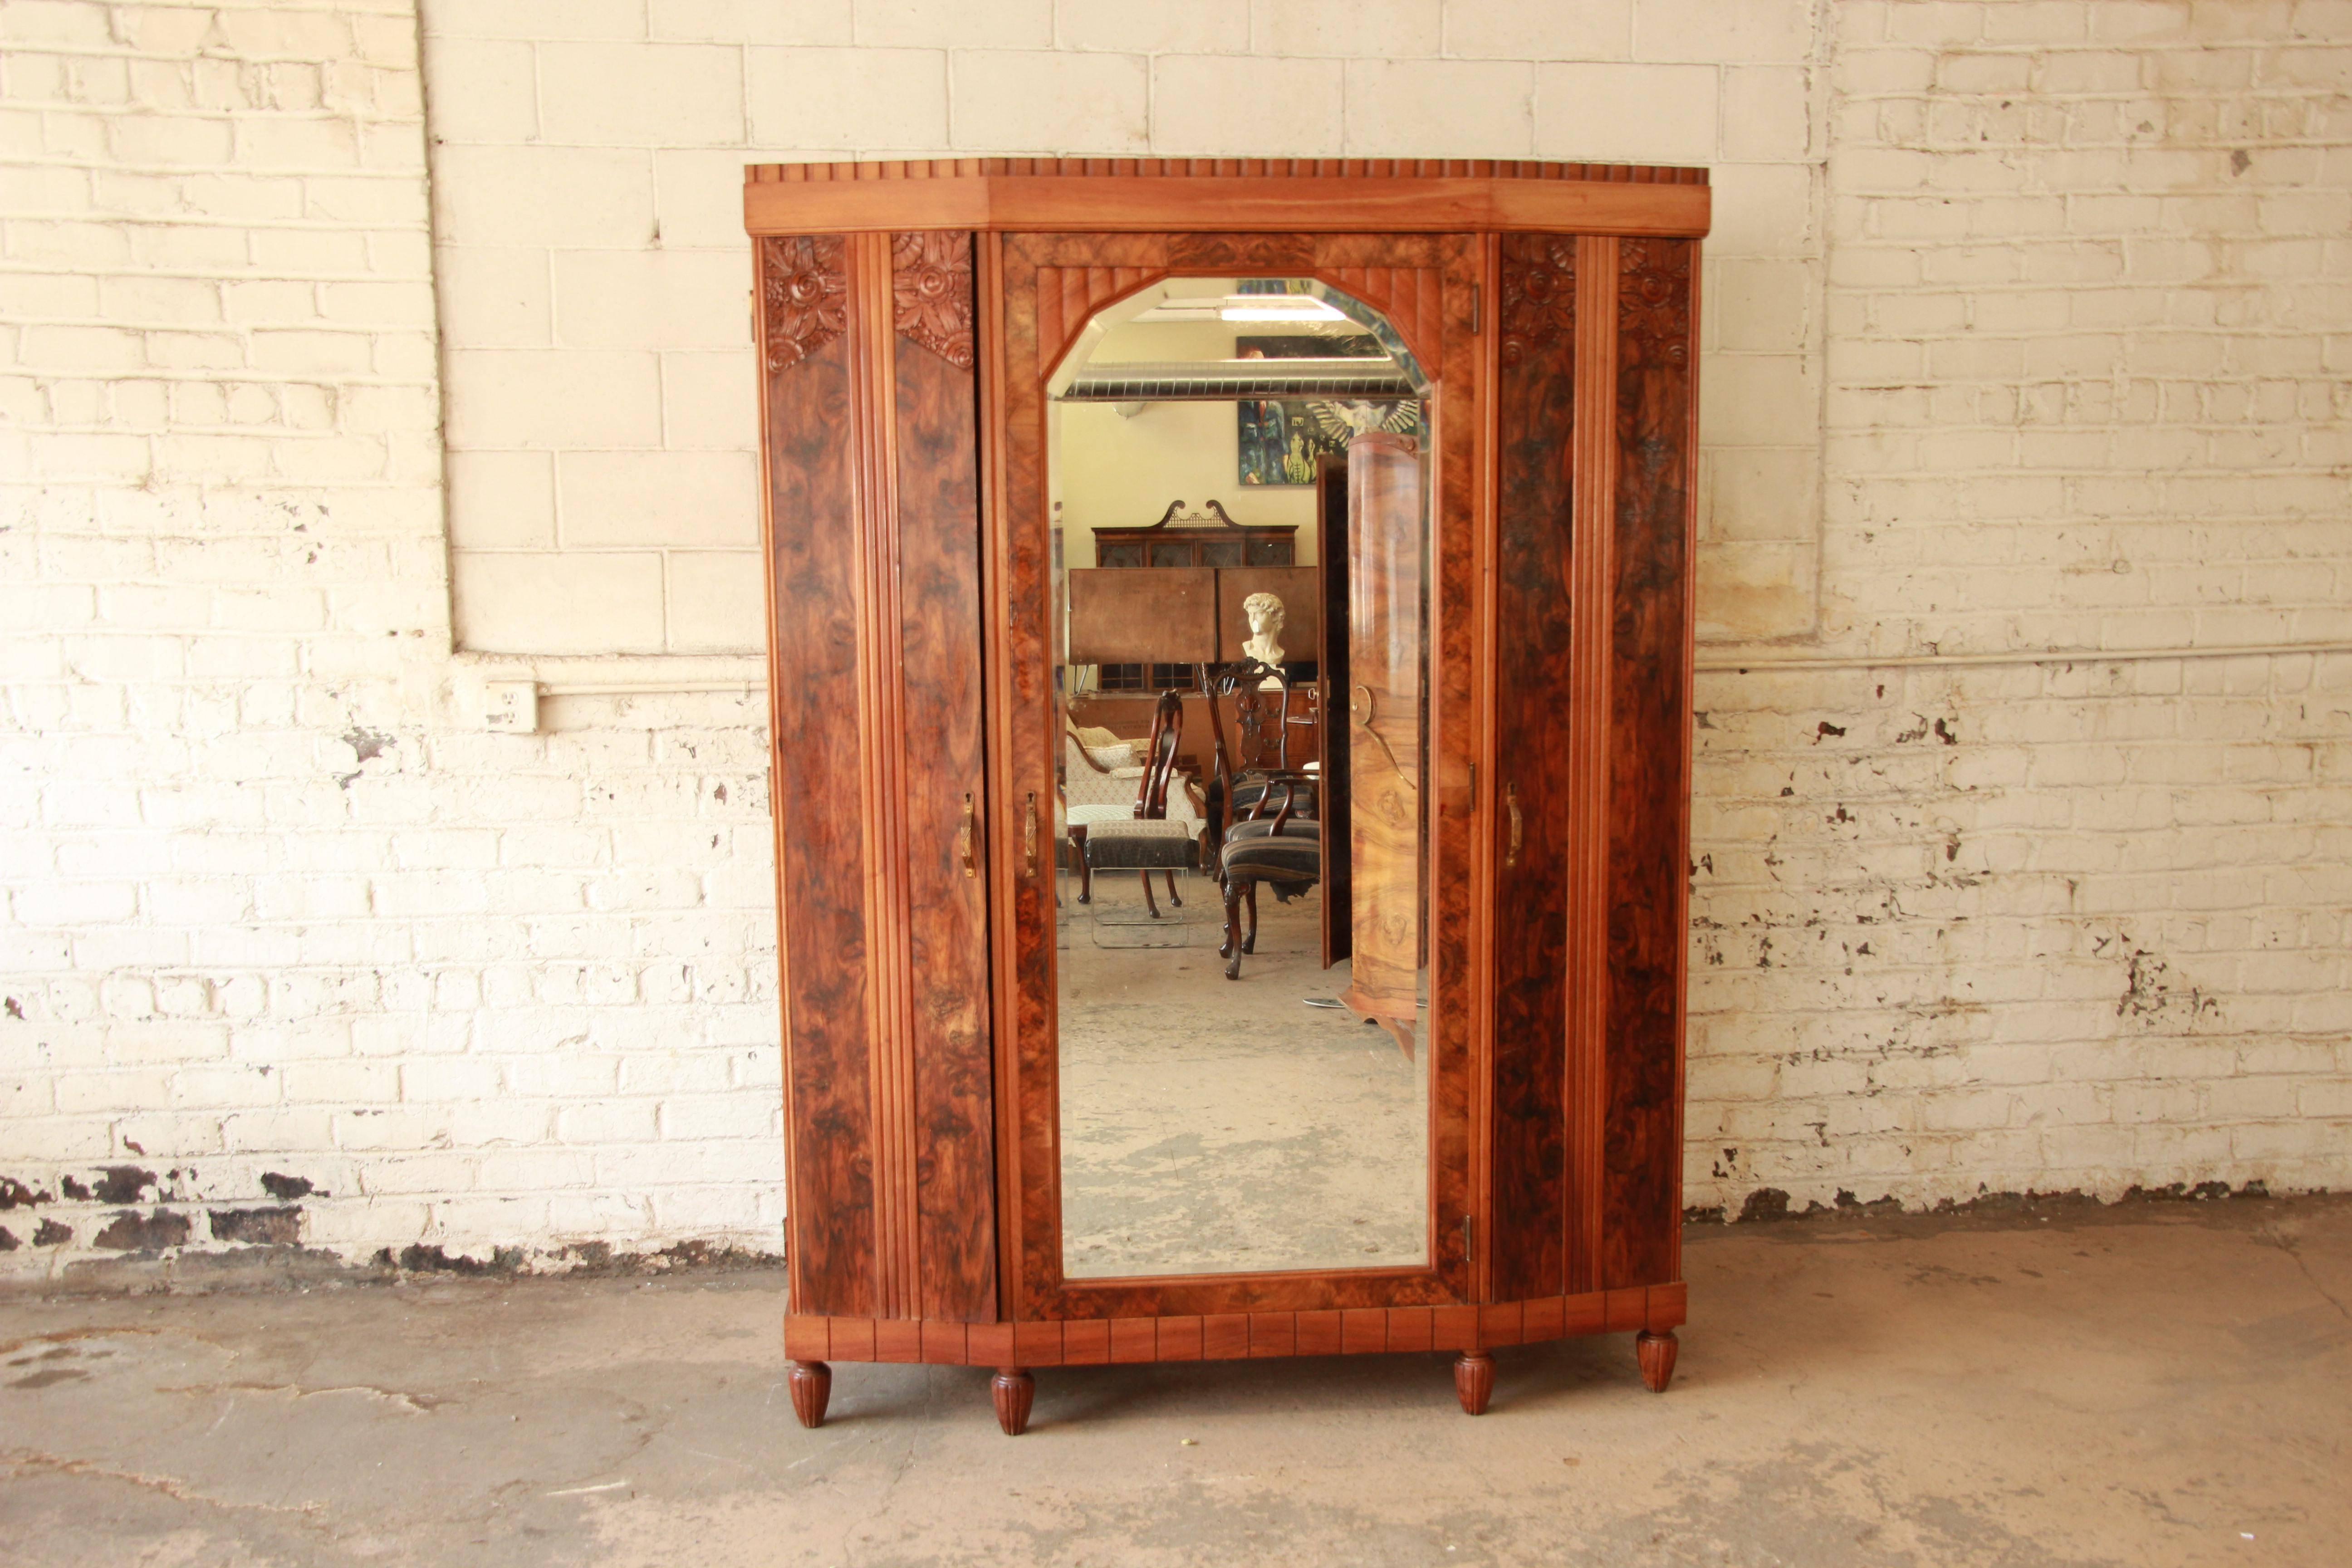 Exceptional 1930s French Art Deco knockdown wardrobe. The wardrobe features stunning burl wood grain, hand-carved details, and a large beveled mirror. It offers ample room for storage, with open shelving throughout and two dovetailed drawers. The